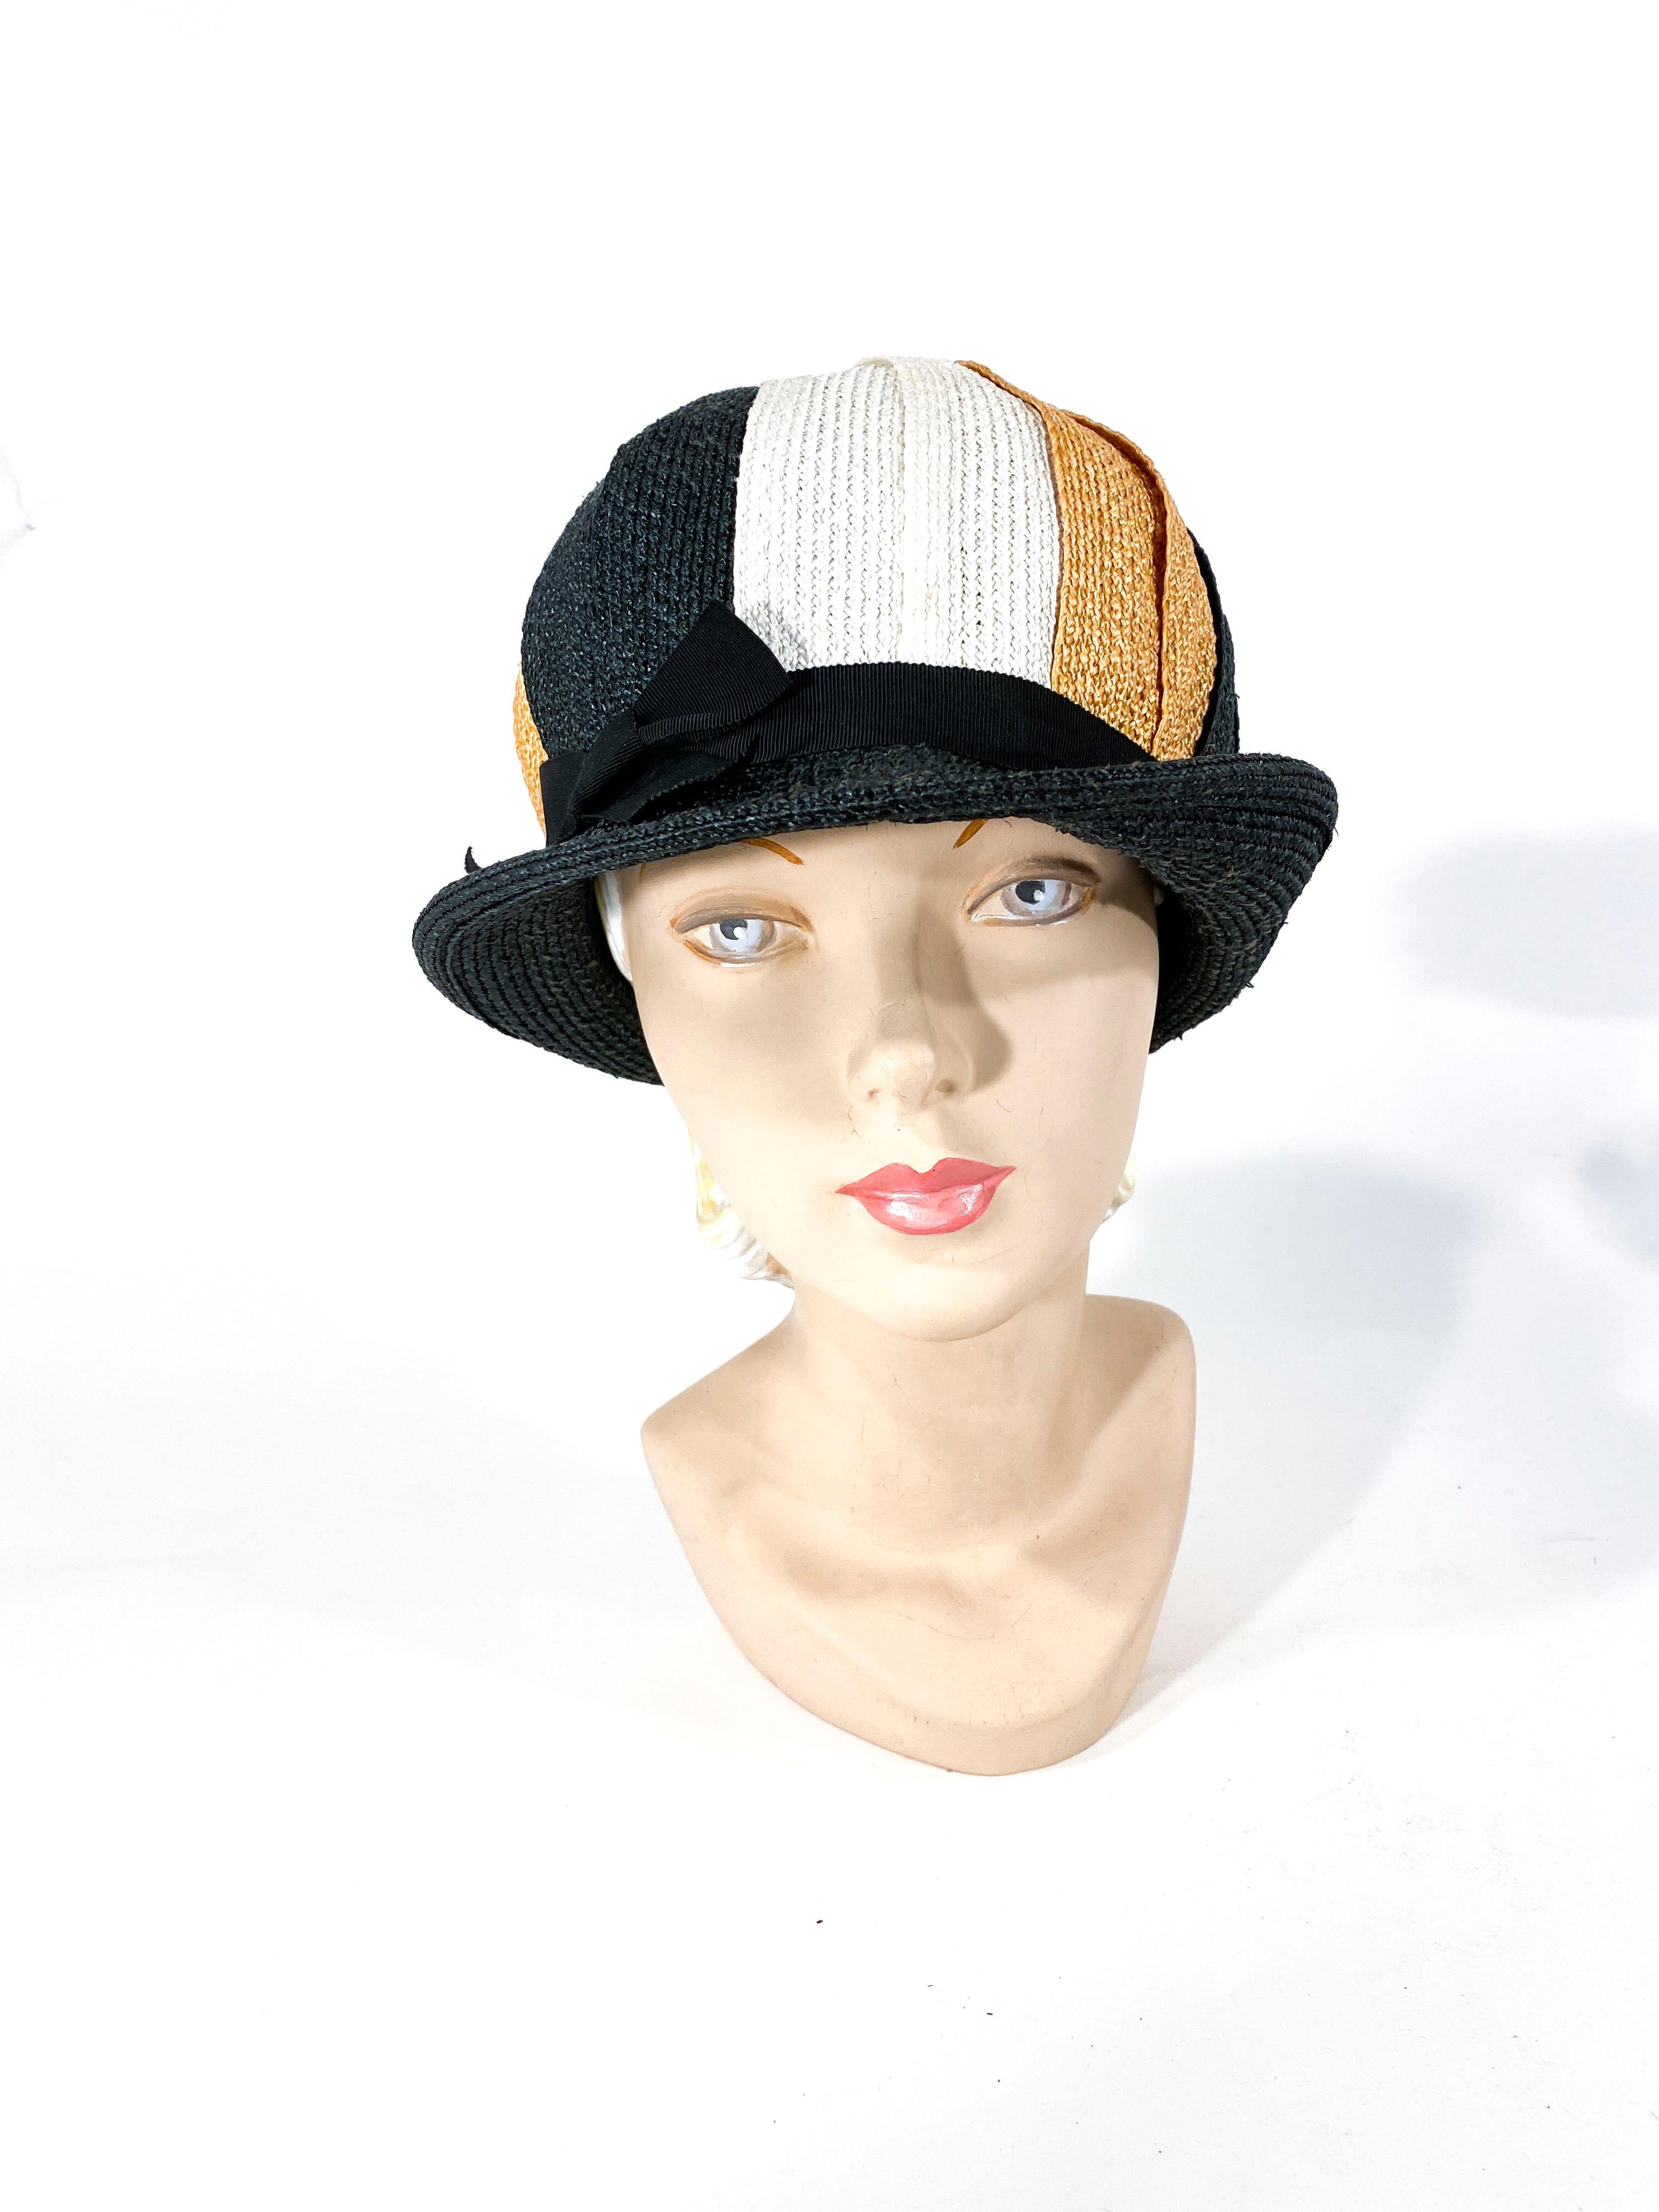 1960s woven raffia hat in black, gold, and cream in a pinwheel pattern. It has a very mod 